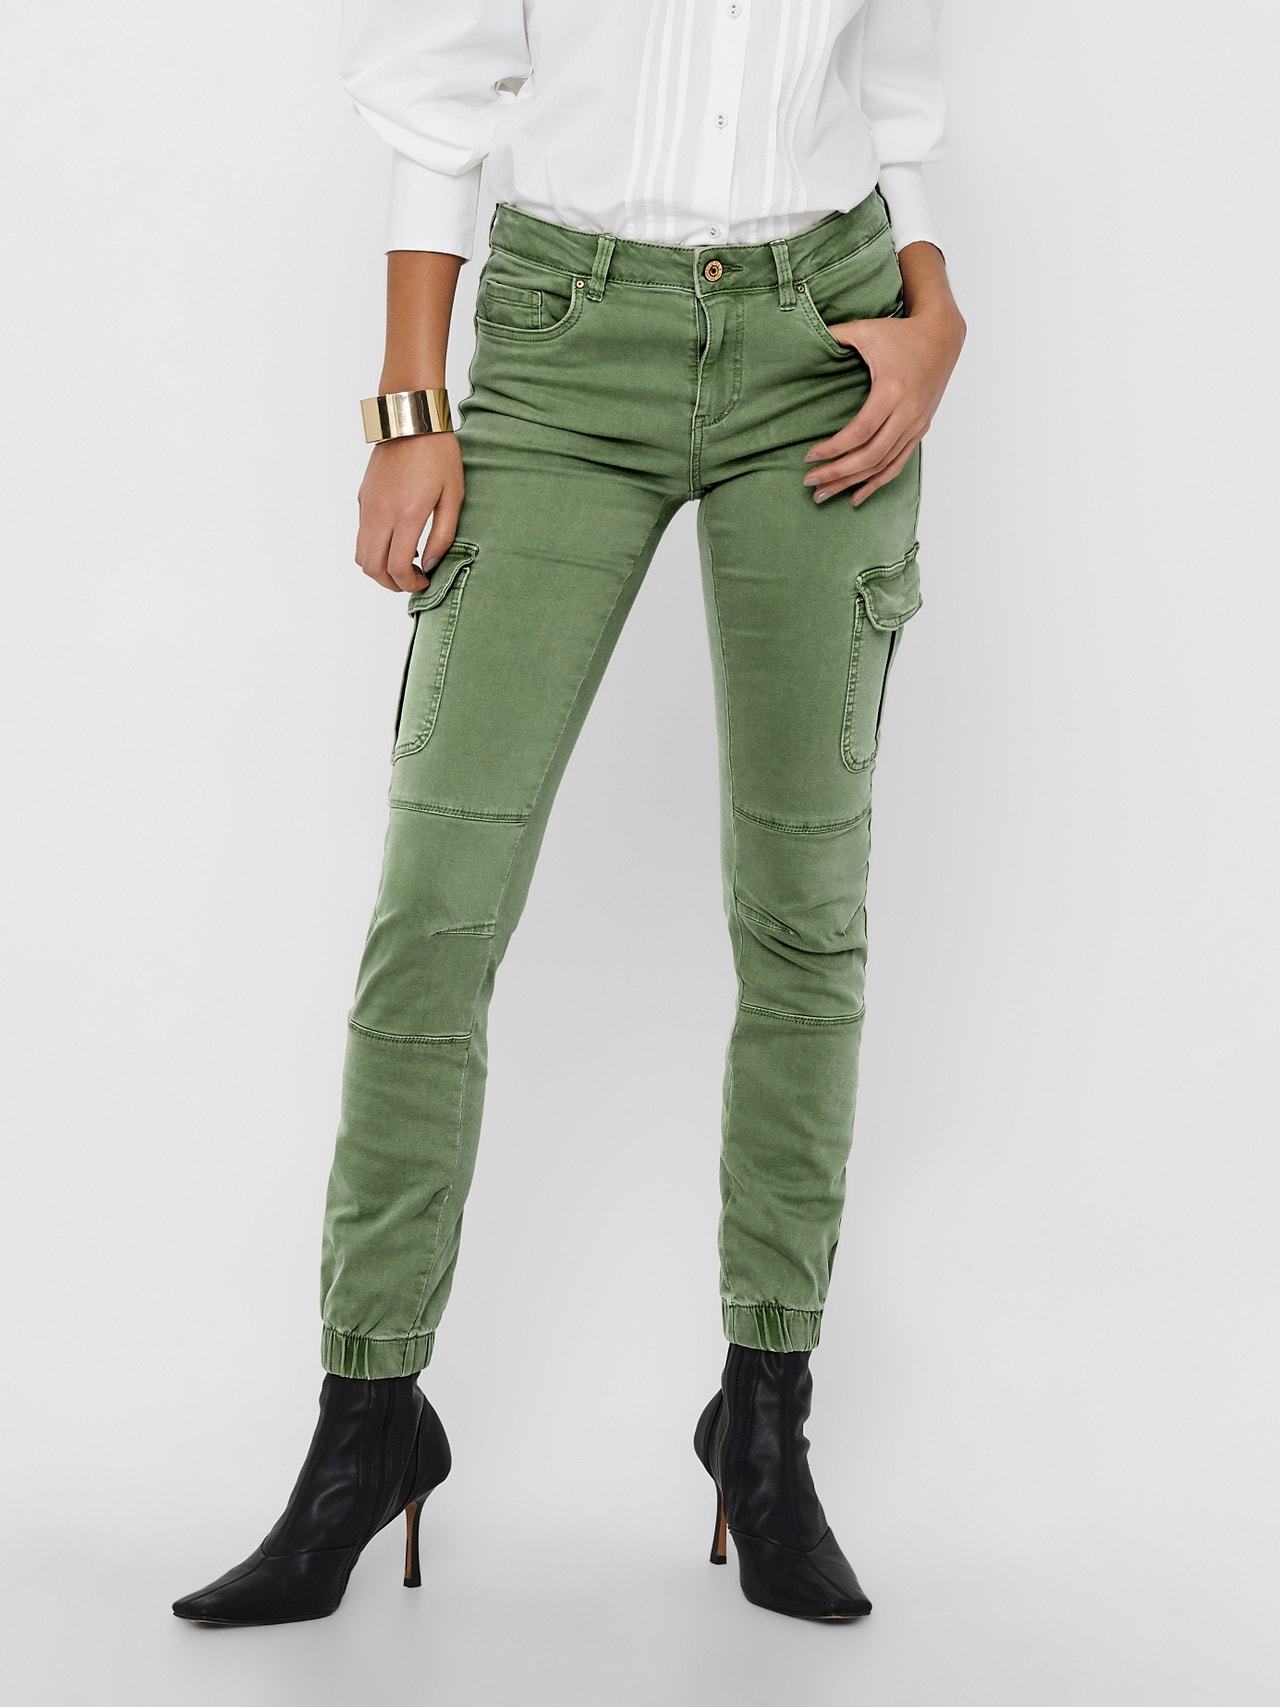 ONLY Slim Fit Mittlere Taille Gummizug Hose -Oil Green - 15170889